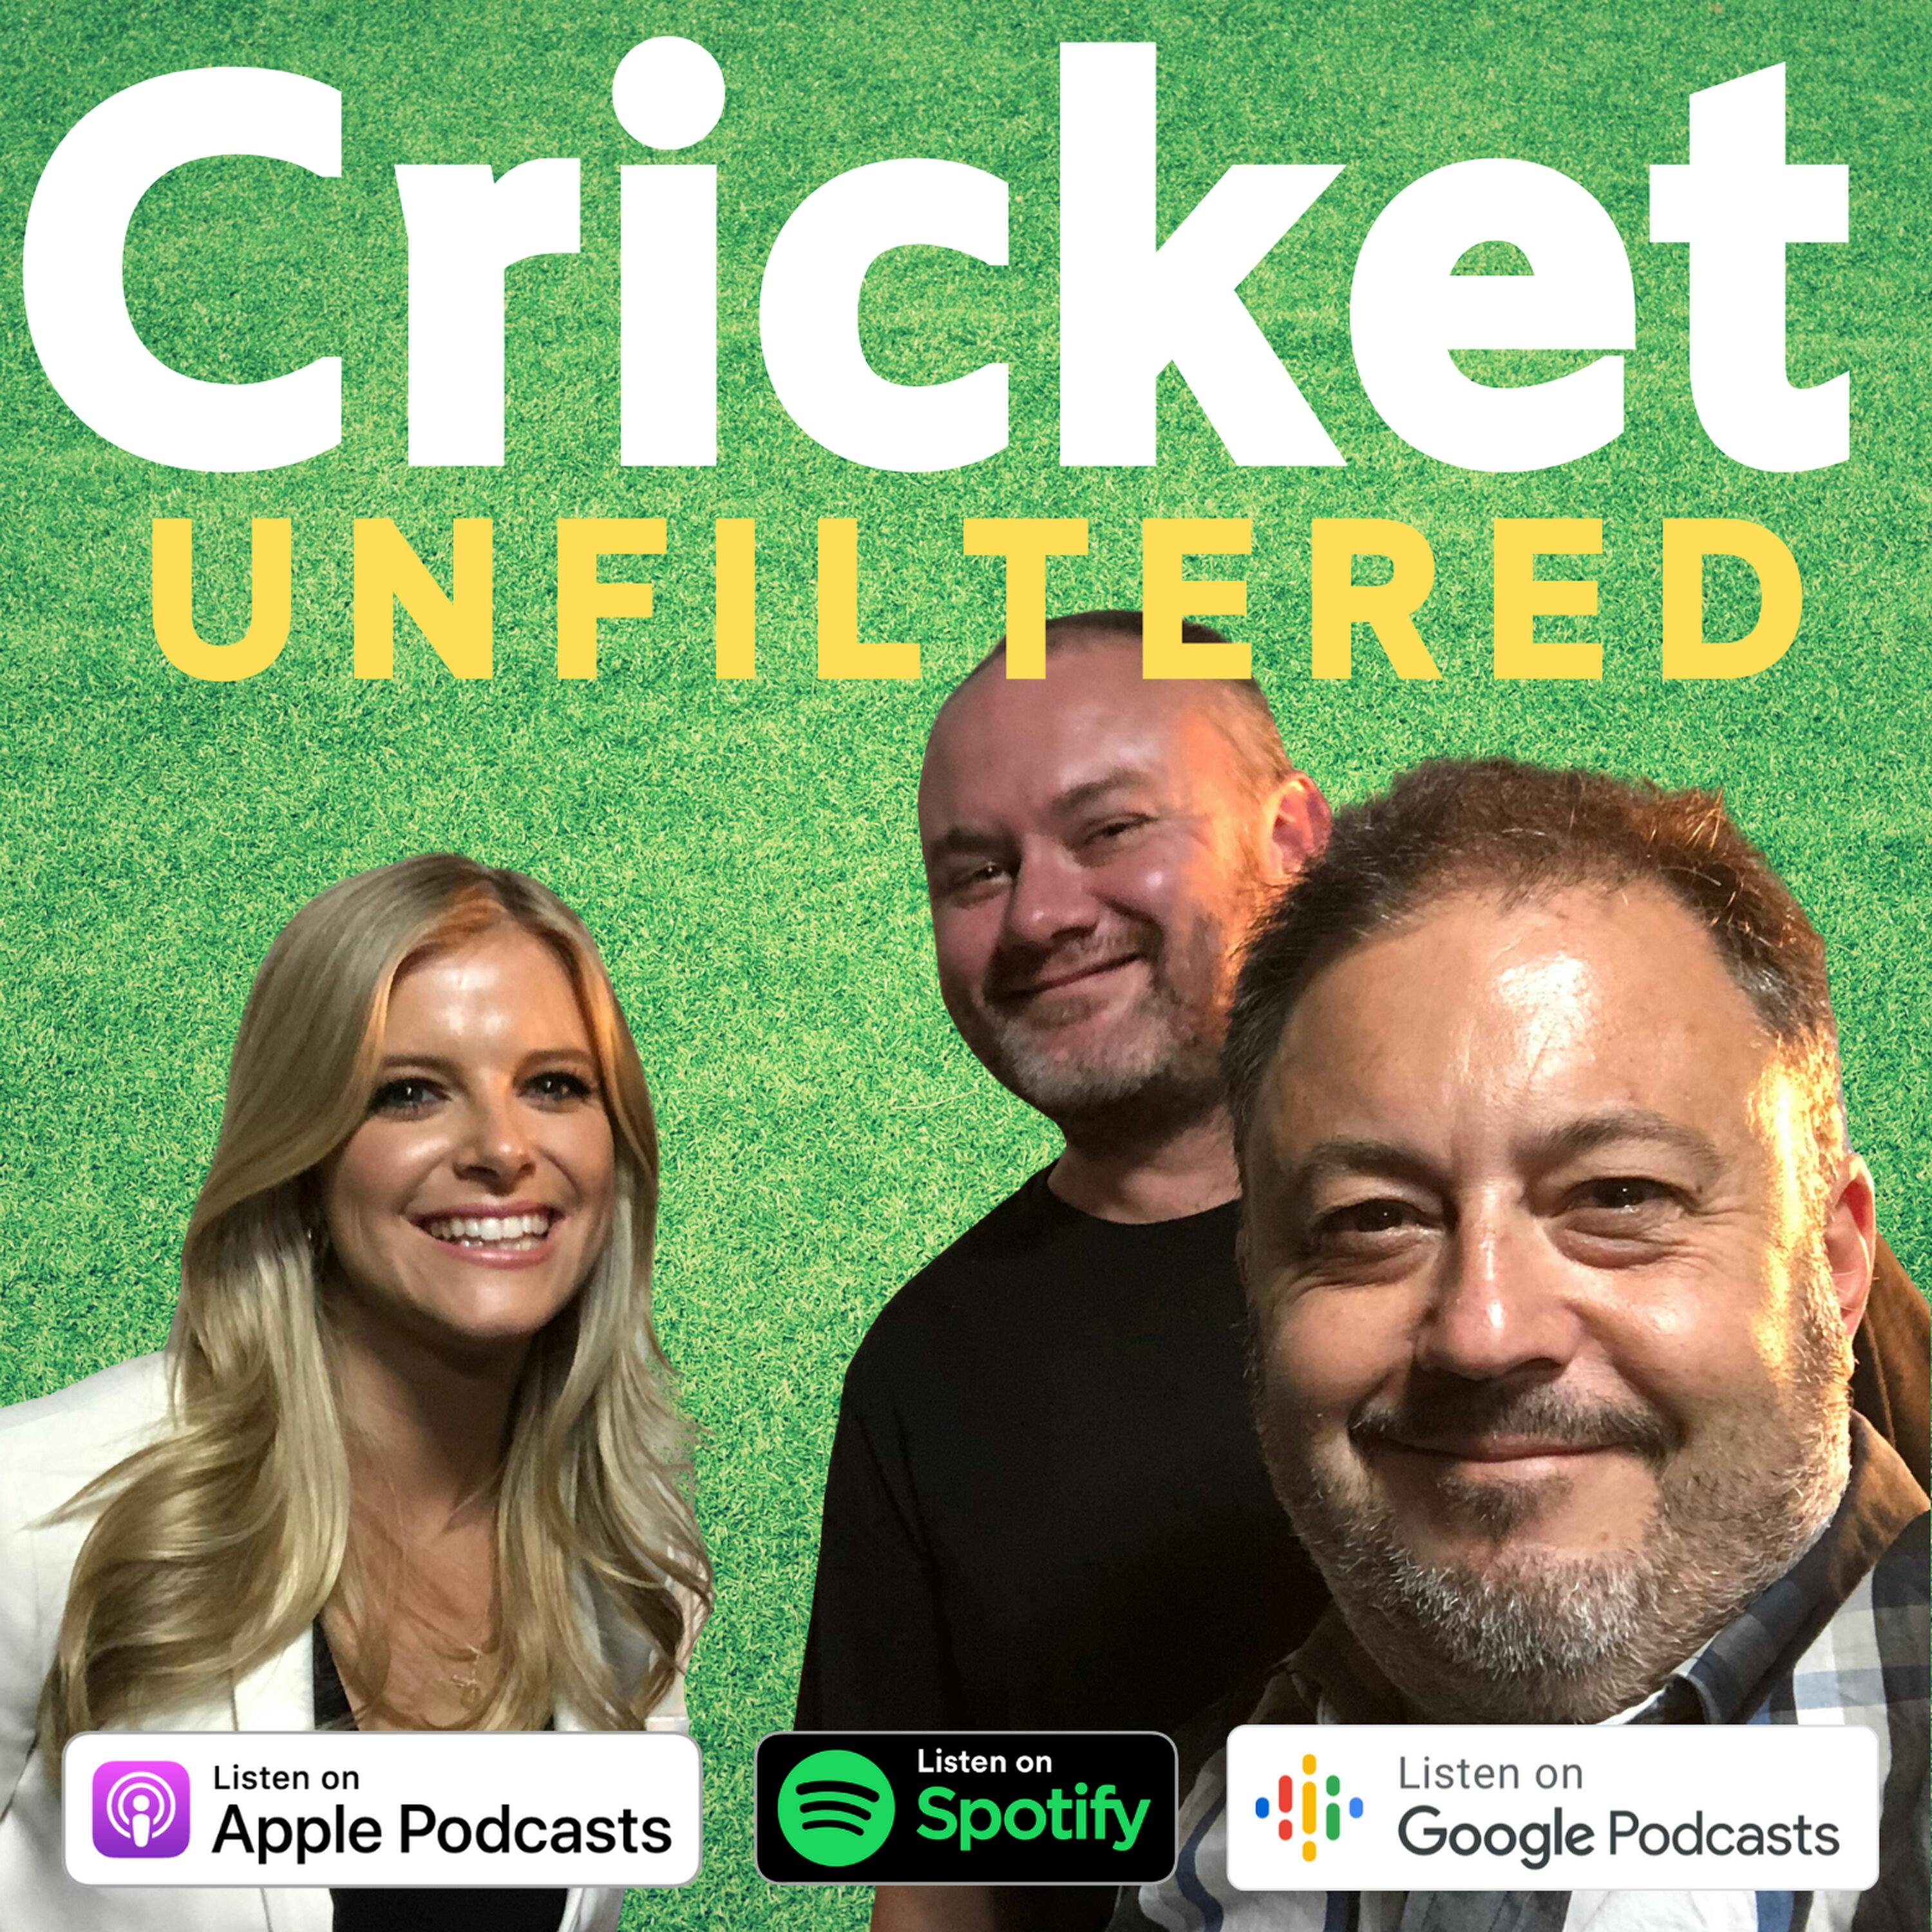 Victorian Cricket Disgrace & 'The Test' Ep 5 Review